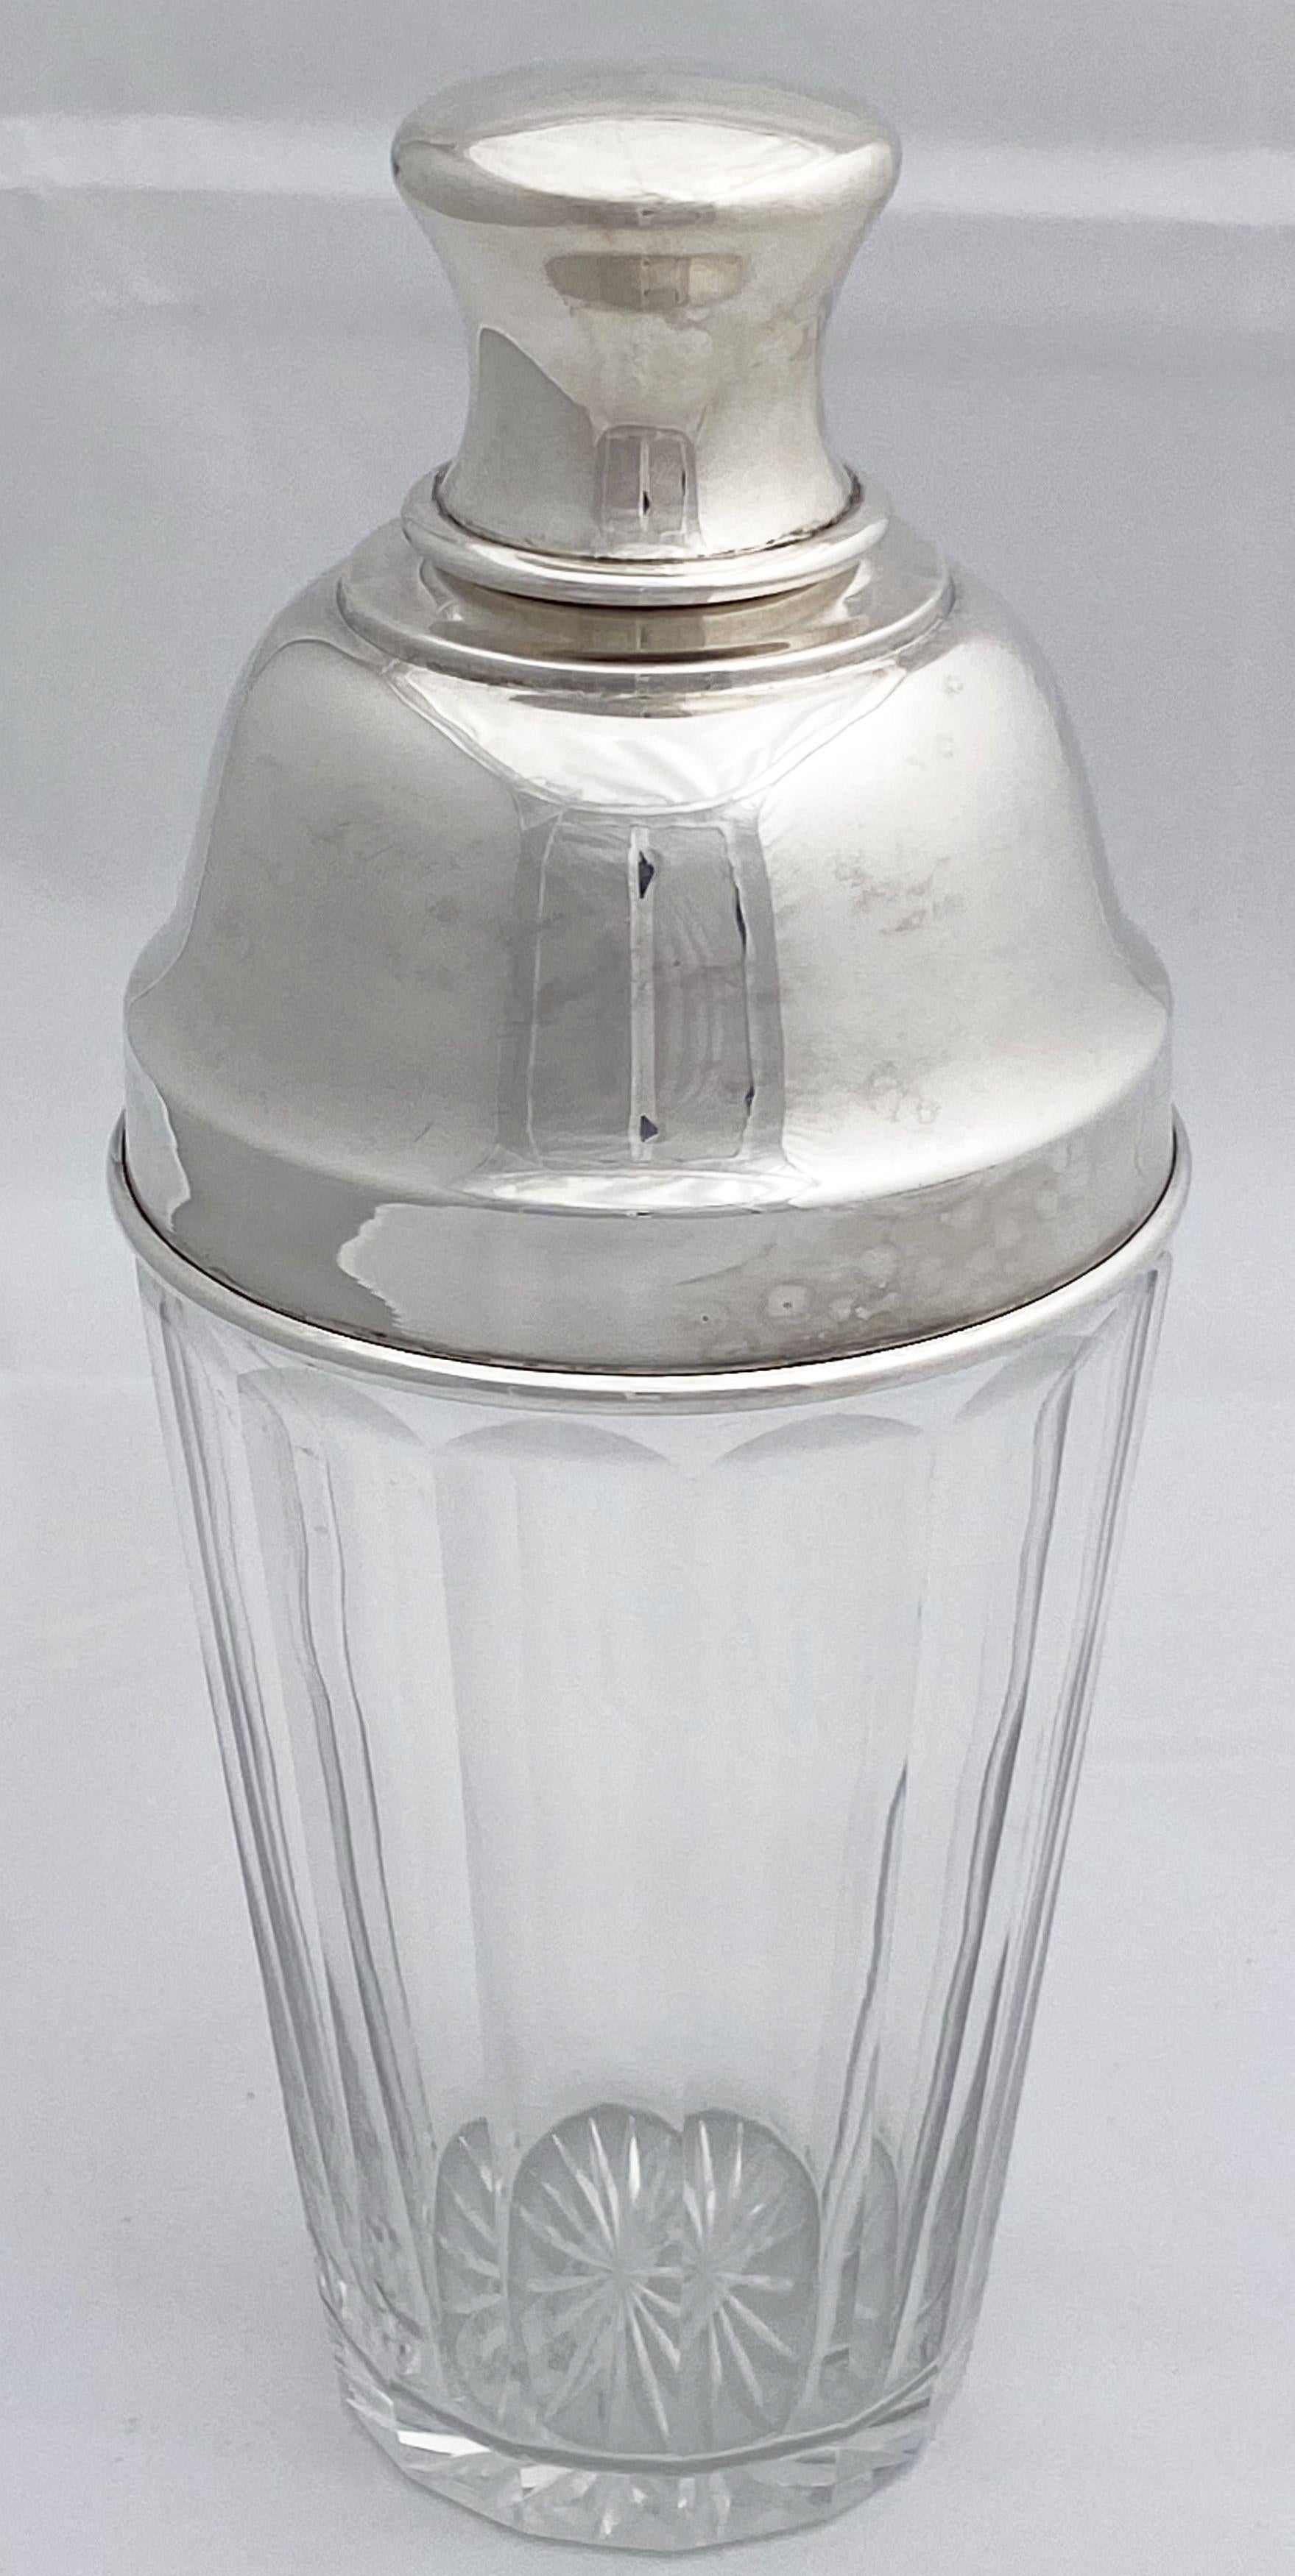 A vintage English cocktail shaker of fine plate silver and cut glass from the Art Deco period, c.1930, featuring a stylish cap and faceted glass body with internal ice strainer.